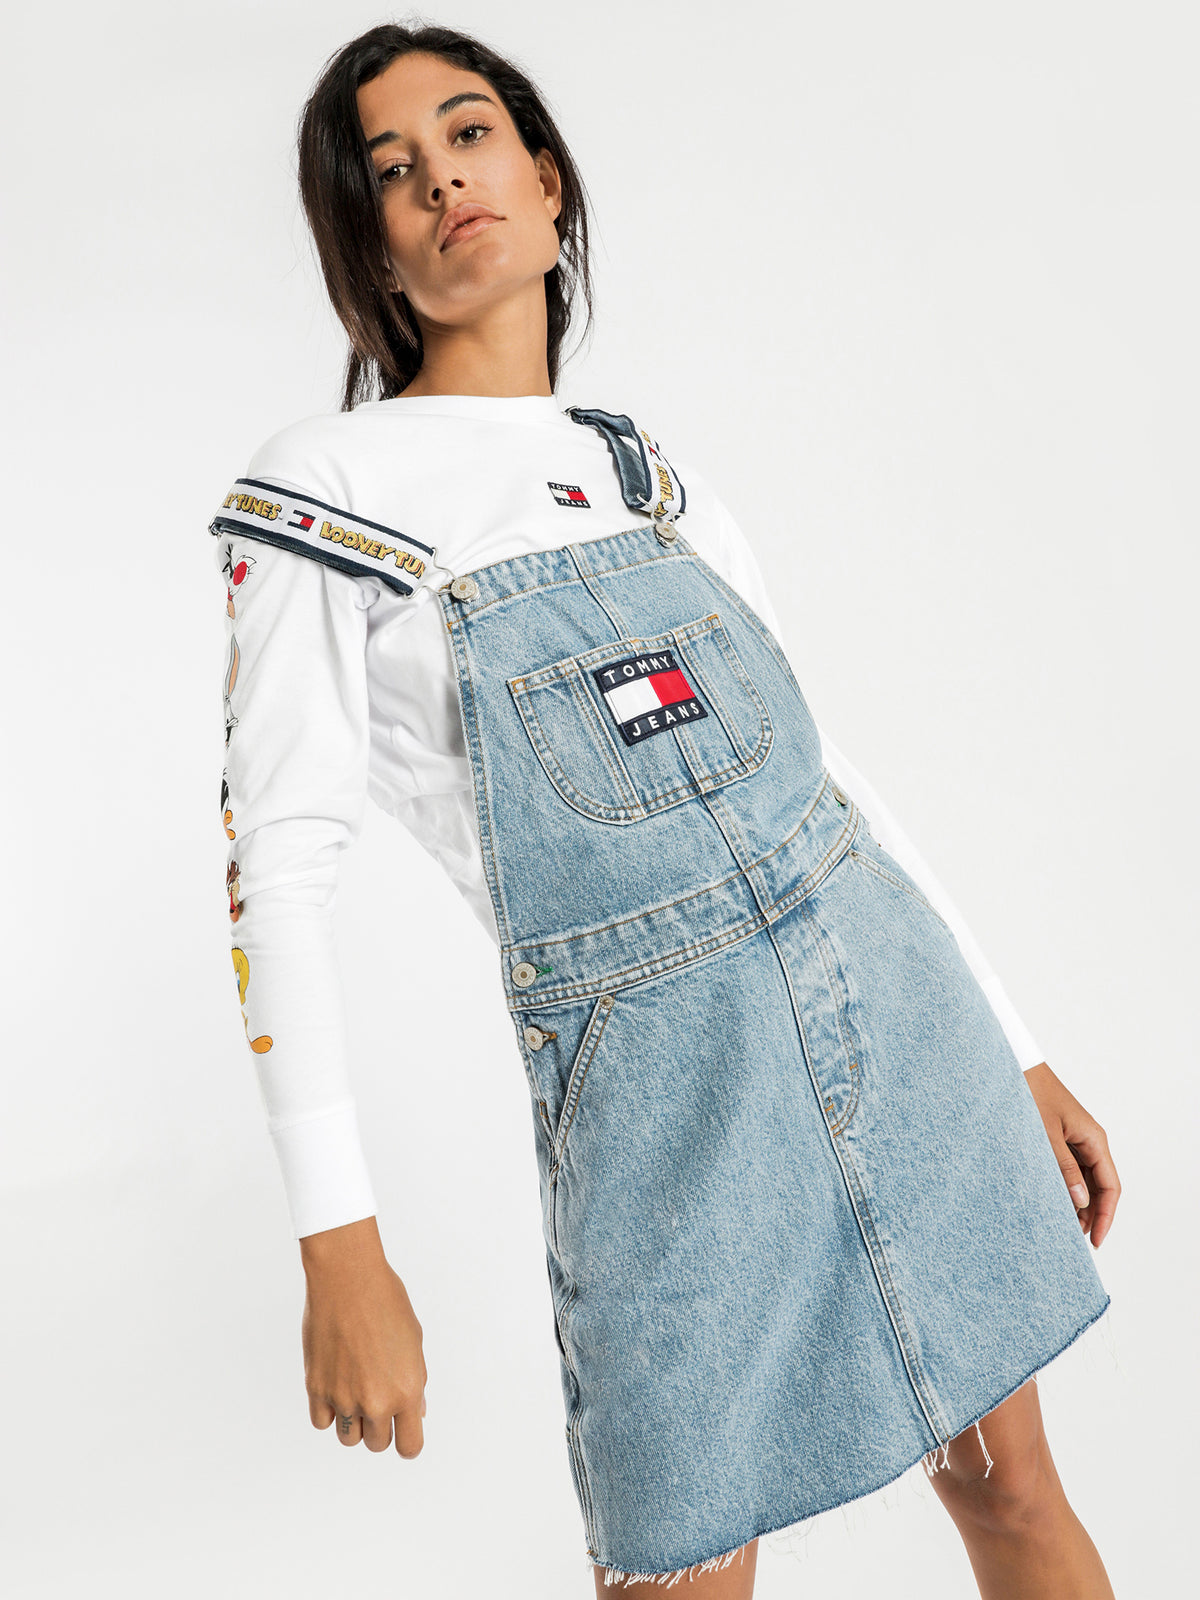 Tommy Jeans X Looney Tunes Overall Dress in Light Blue Denim